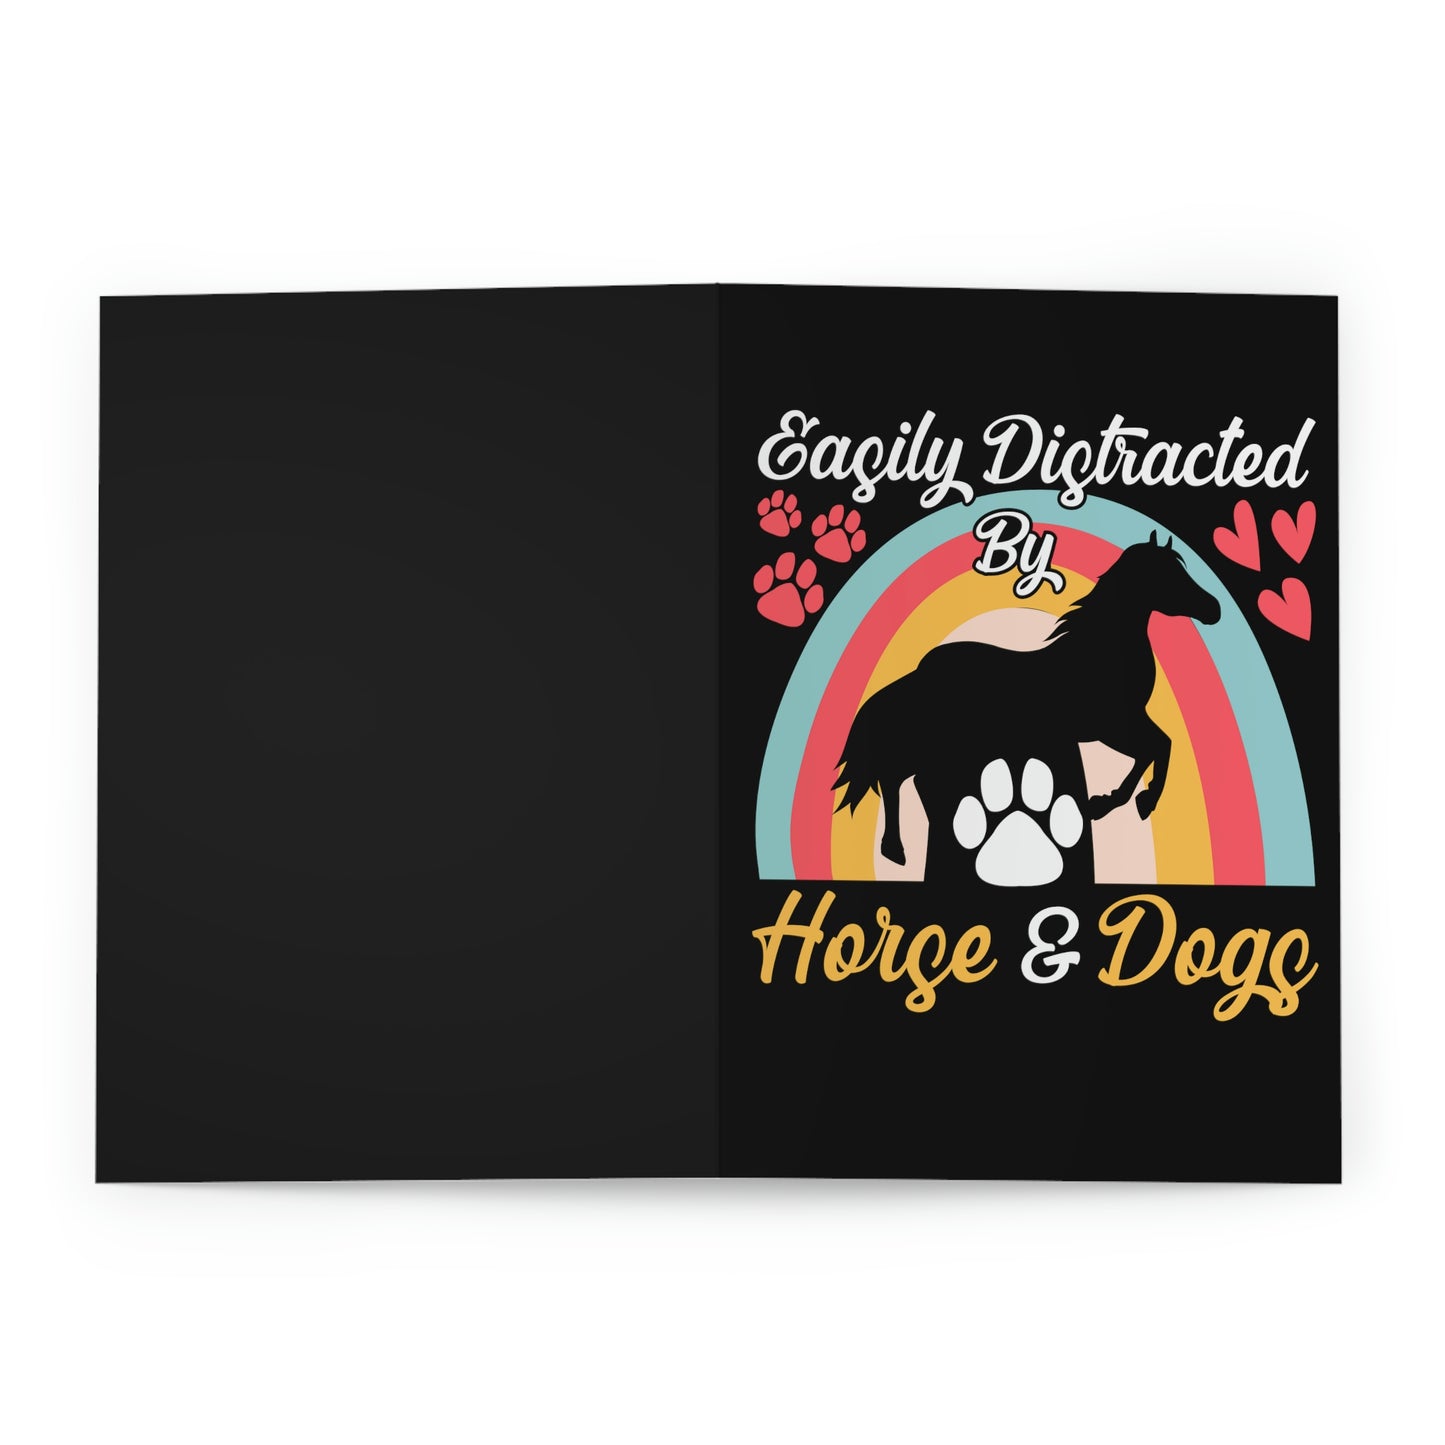 Easily Distracted by Horse and Dogs Greeting Cards (5 Pack)